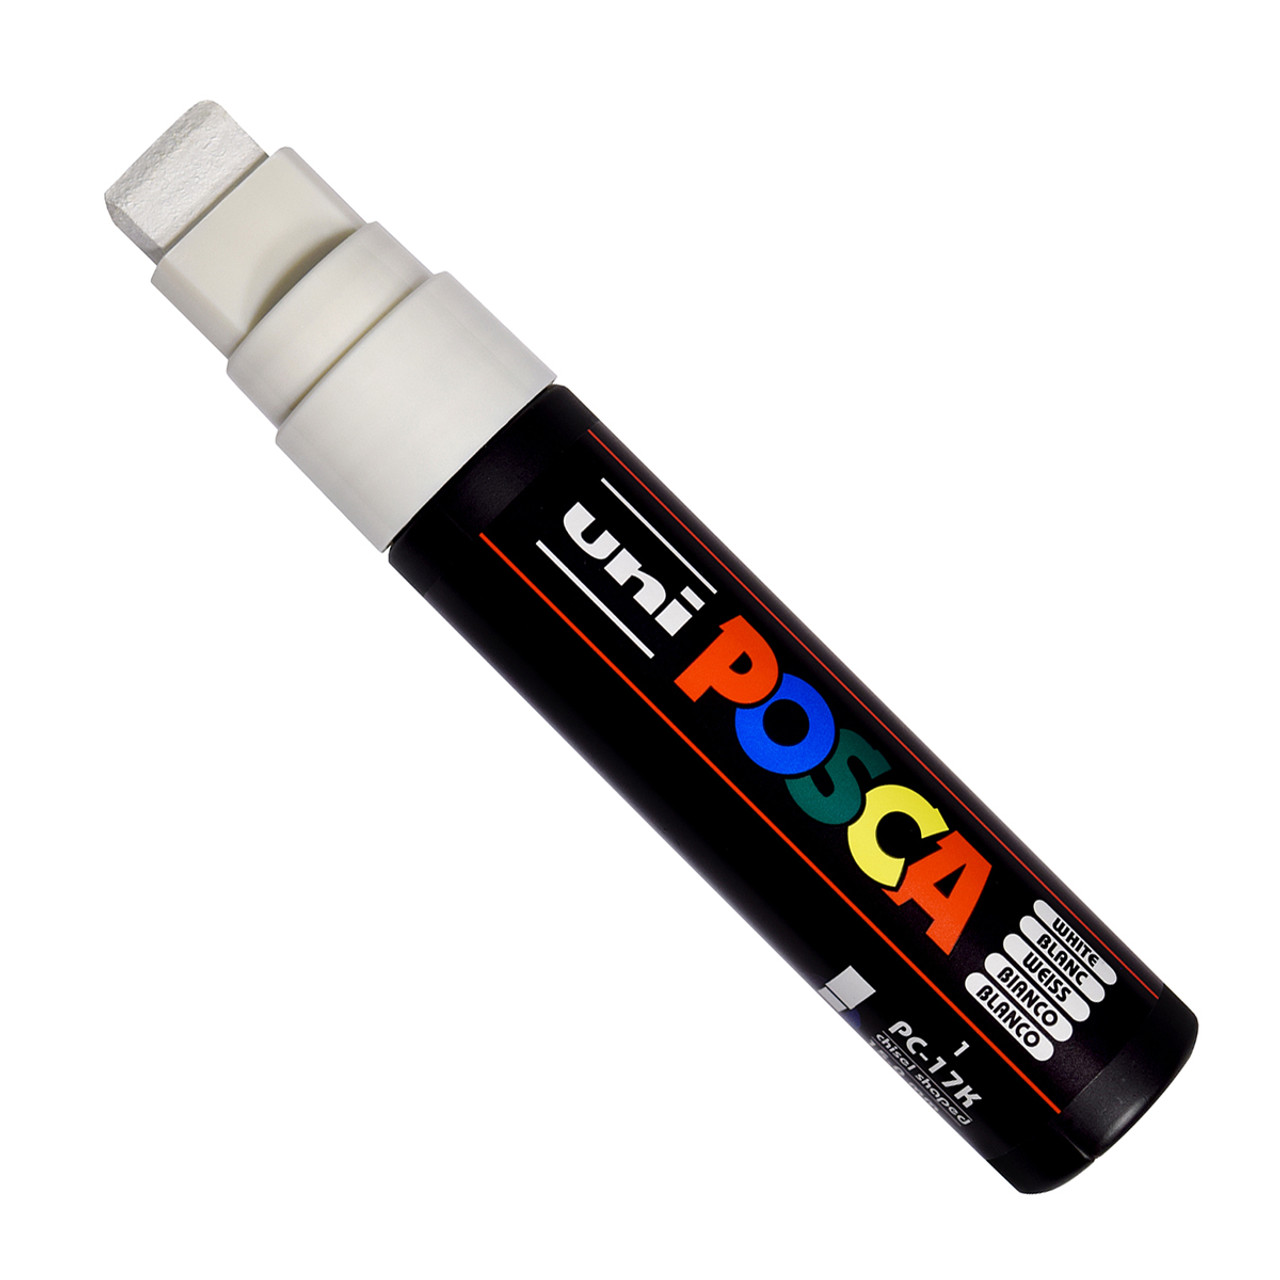 Giant Flat Marker from POSCA? PC-17K, How does it work? Canvas